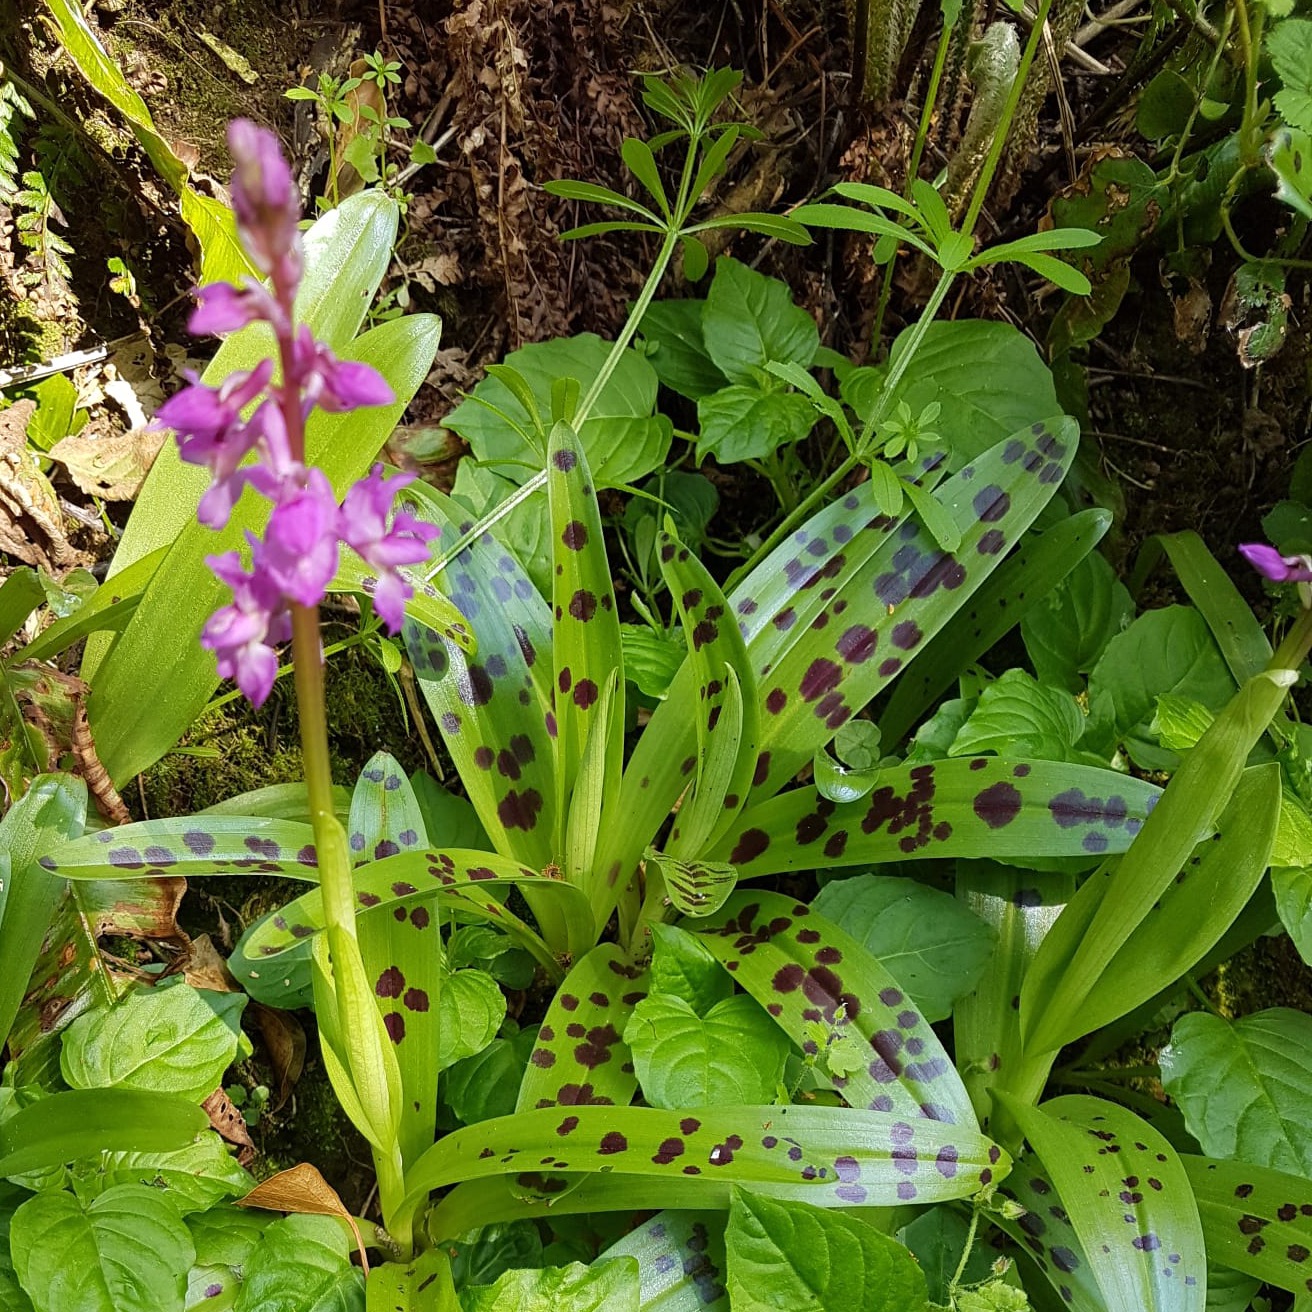 Early spotted orchid